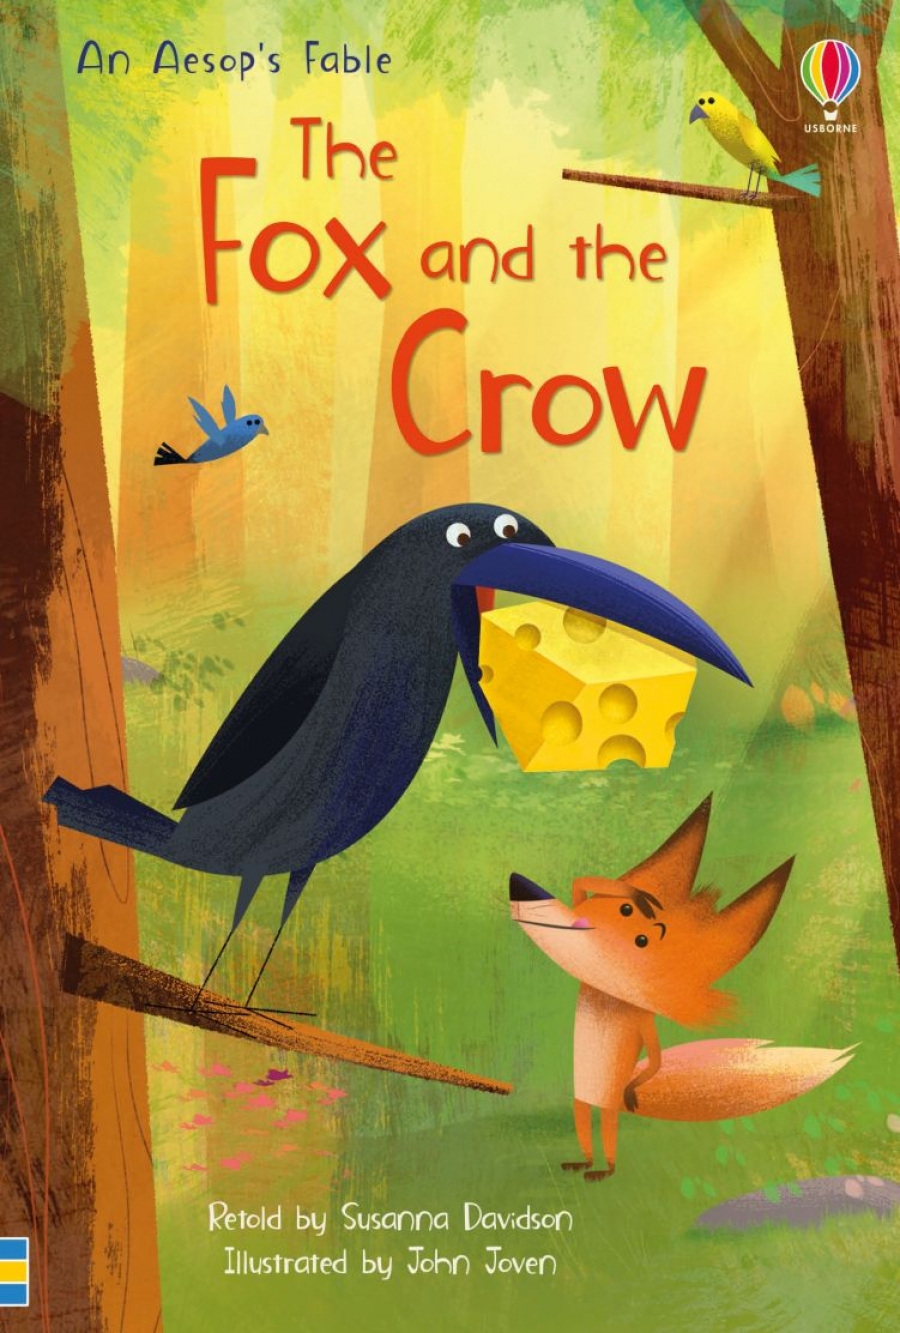 Susanna Davidson Usborne First Reading 3 The Fox and the Crow (An Aesop's Fable) 